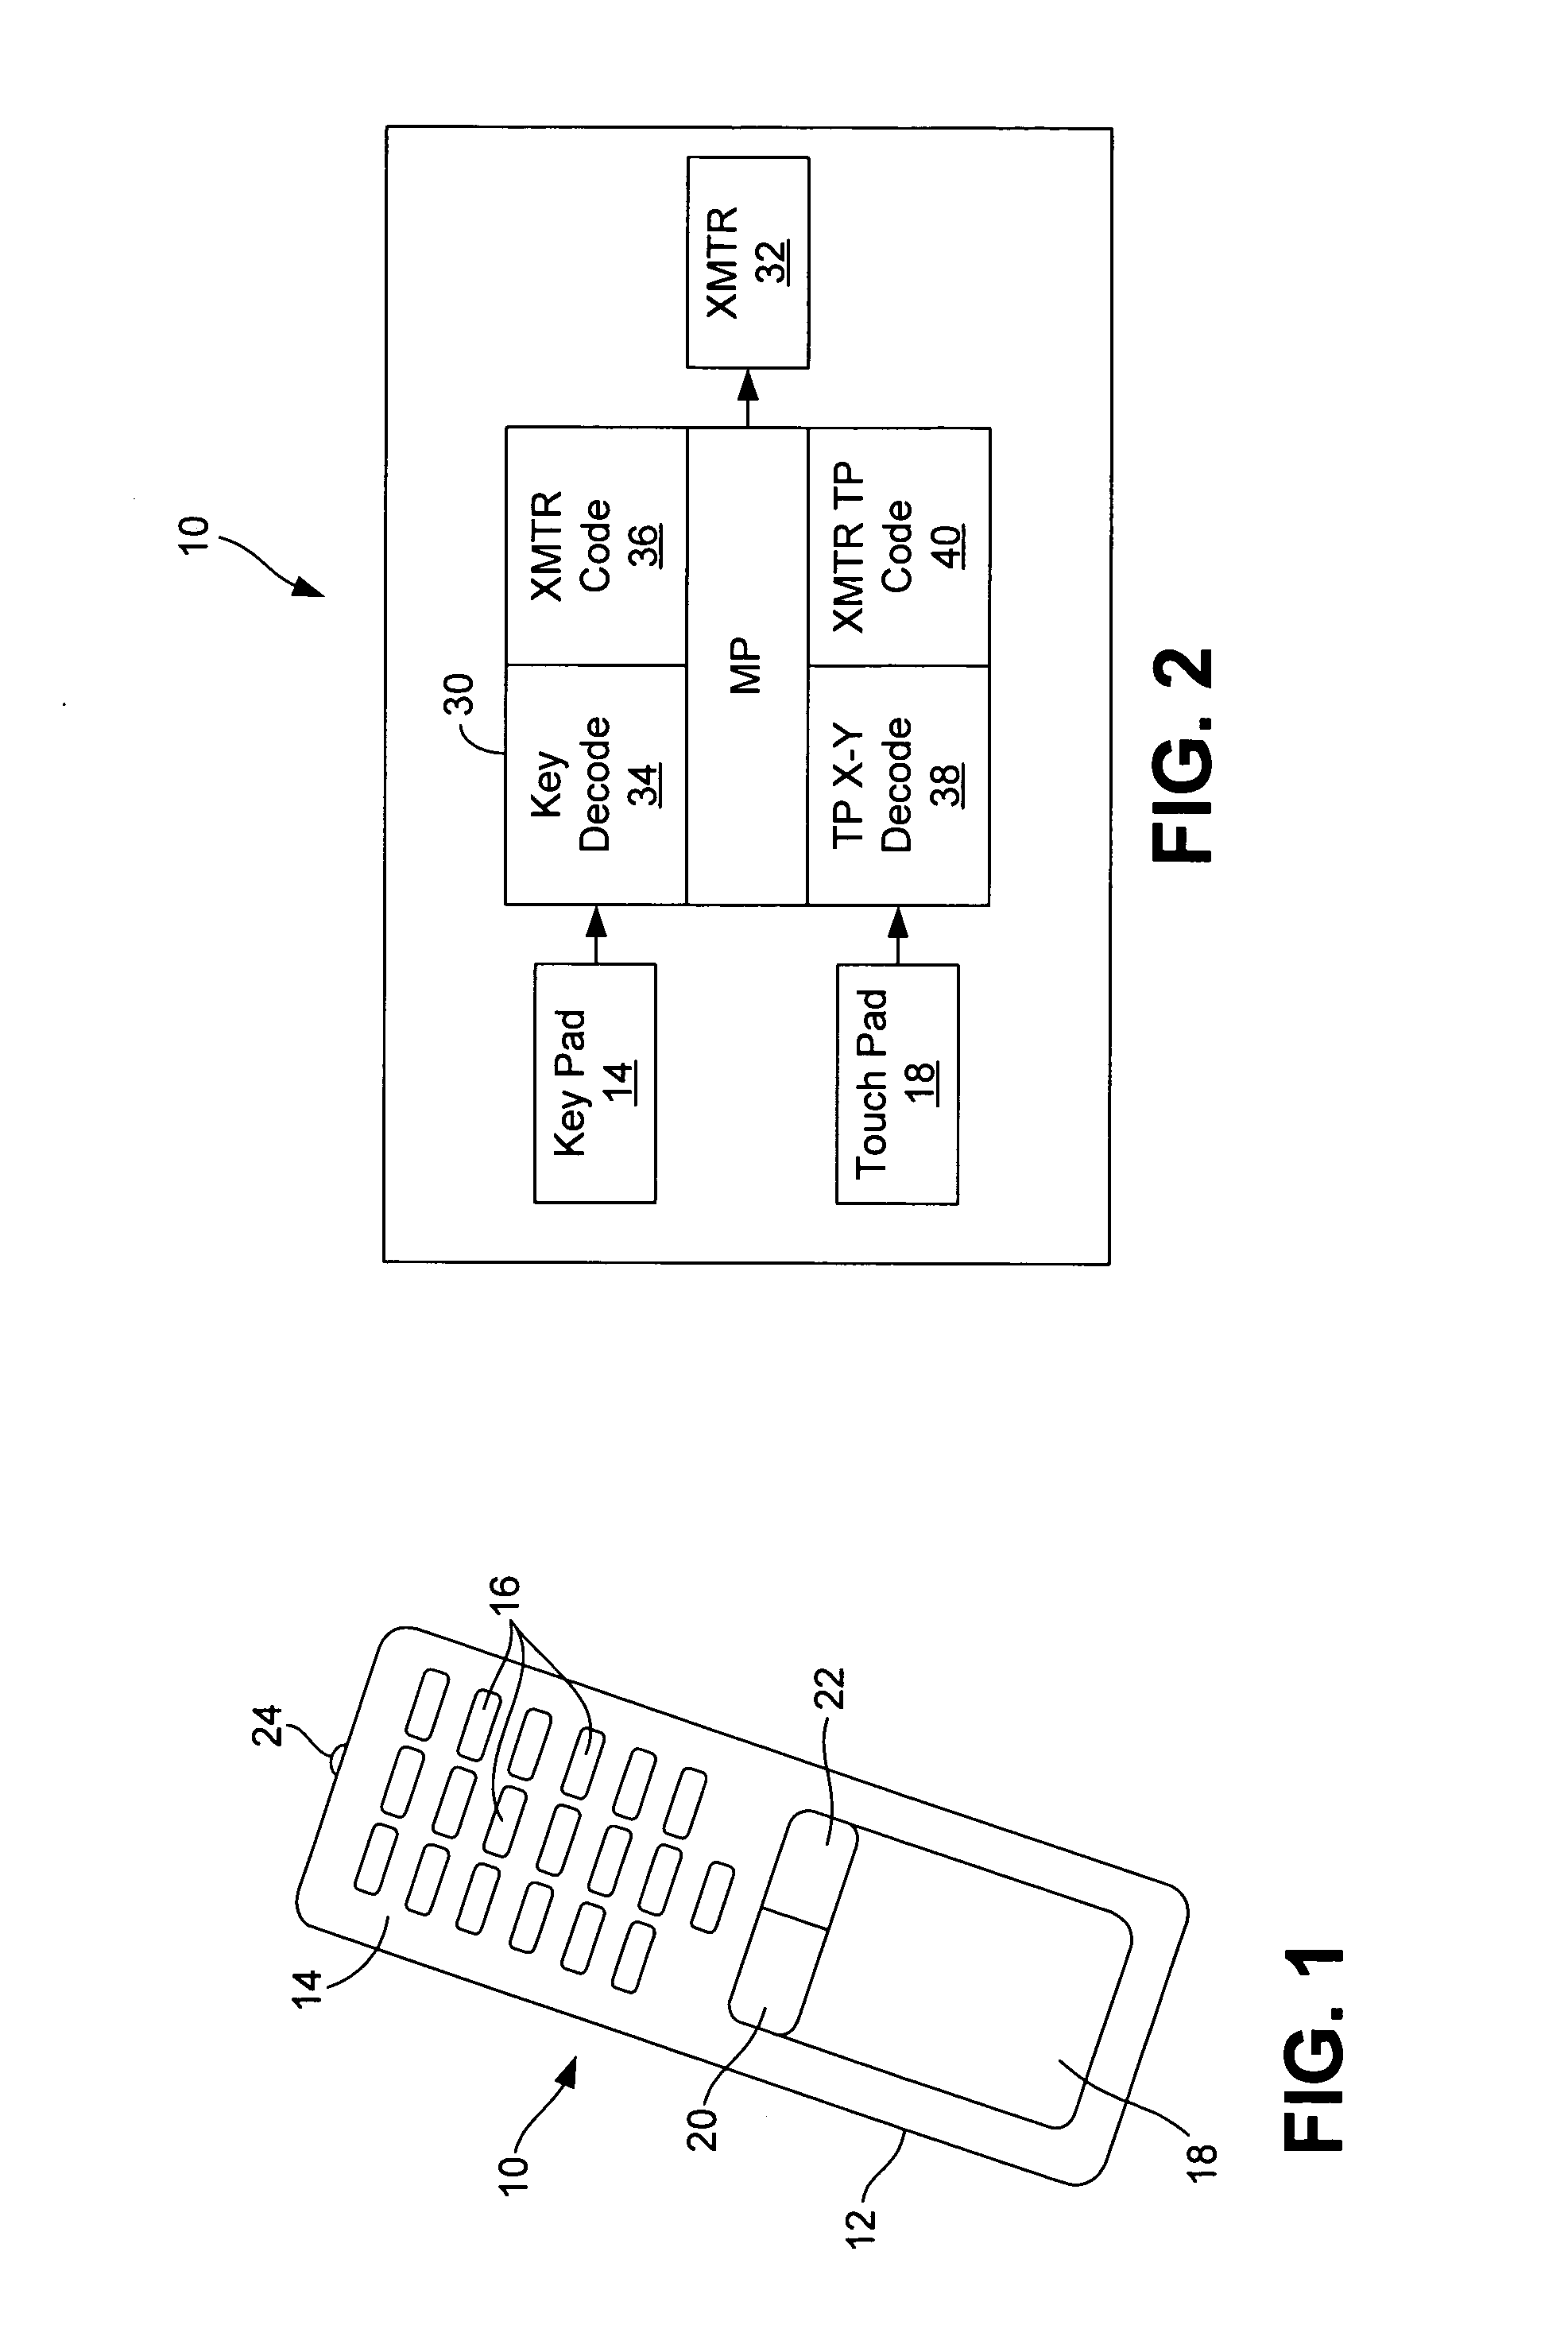 Remote control with touchpad and method